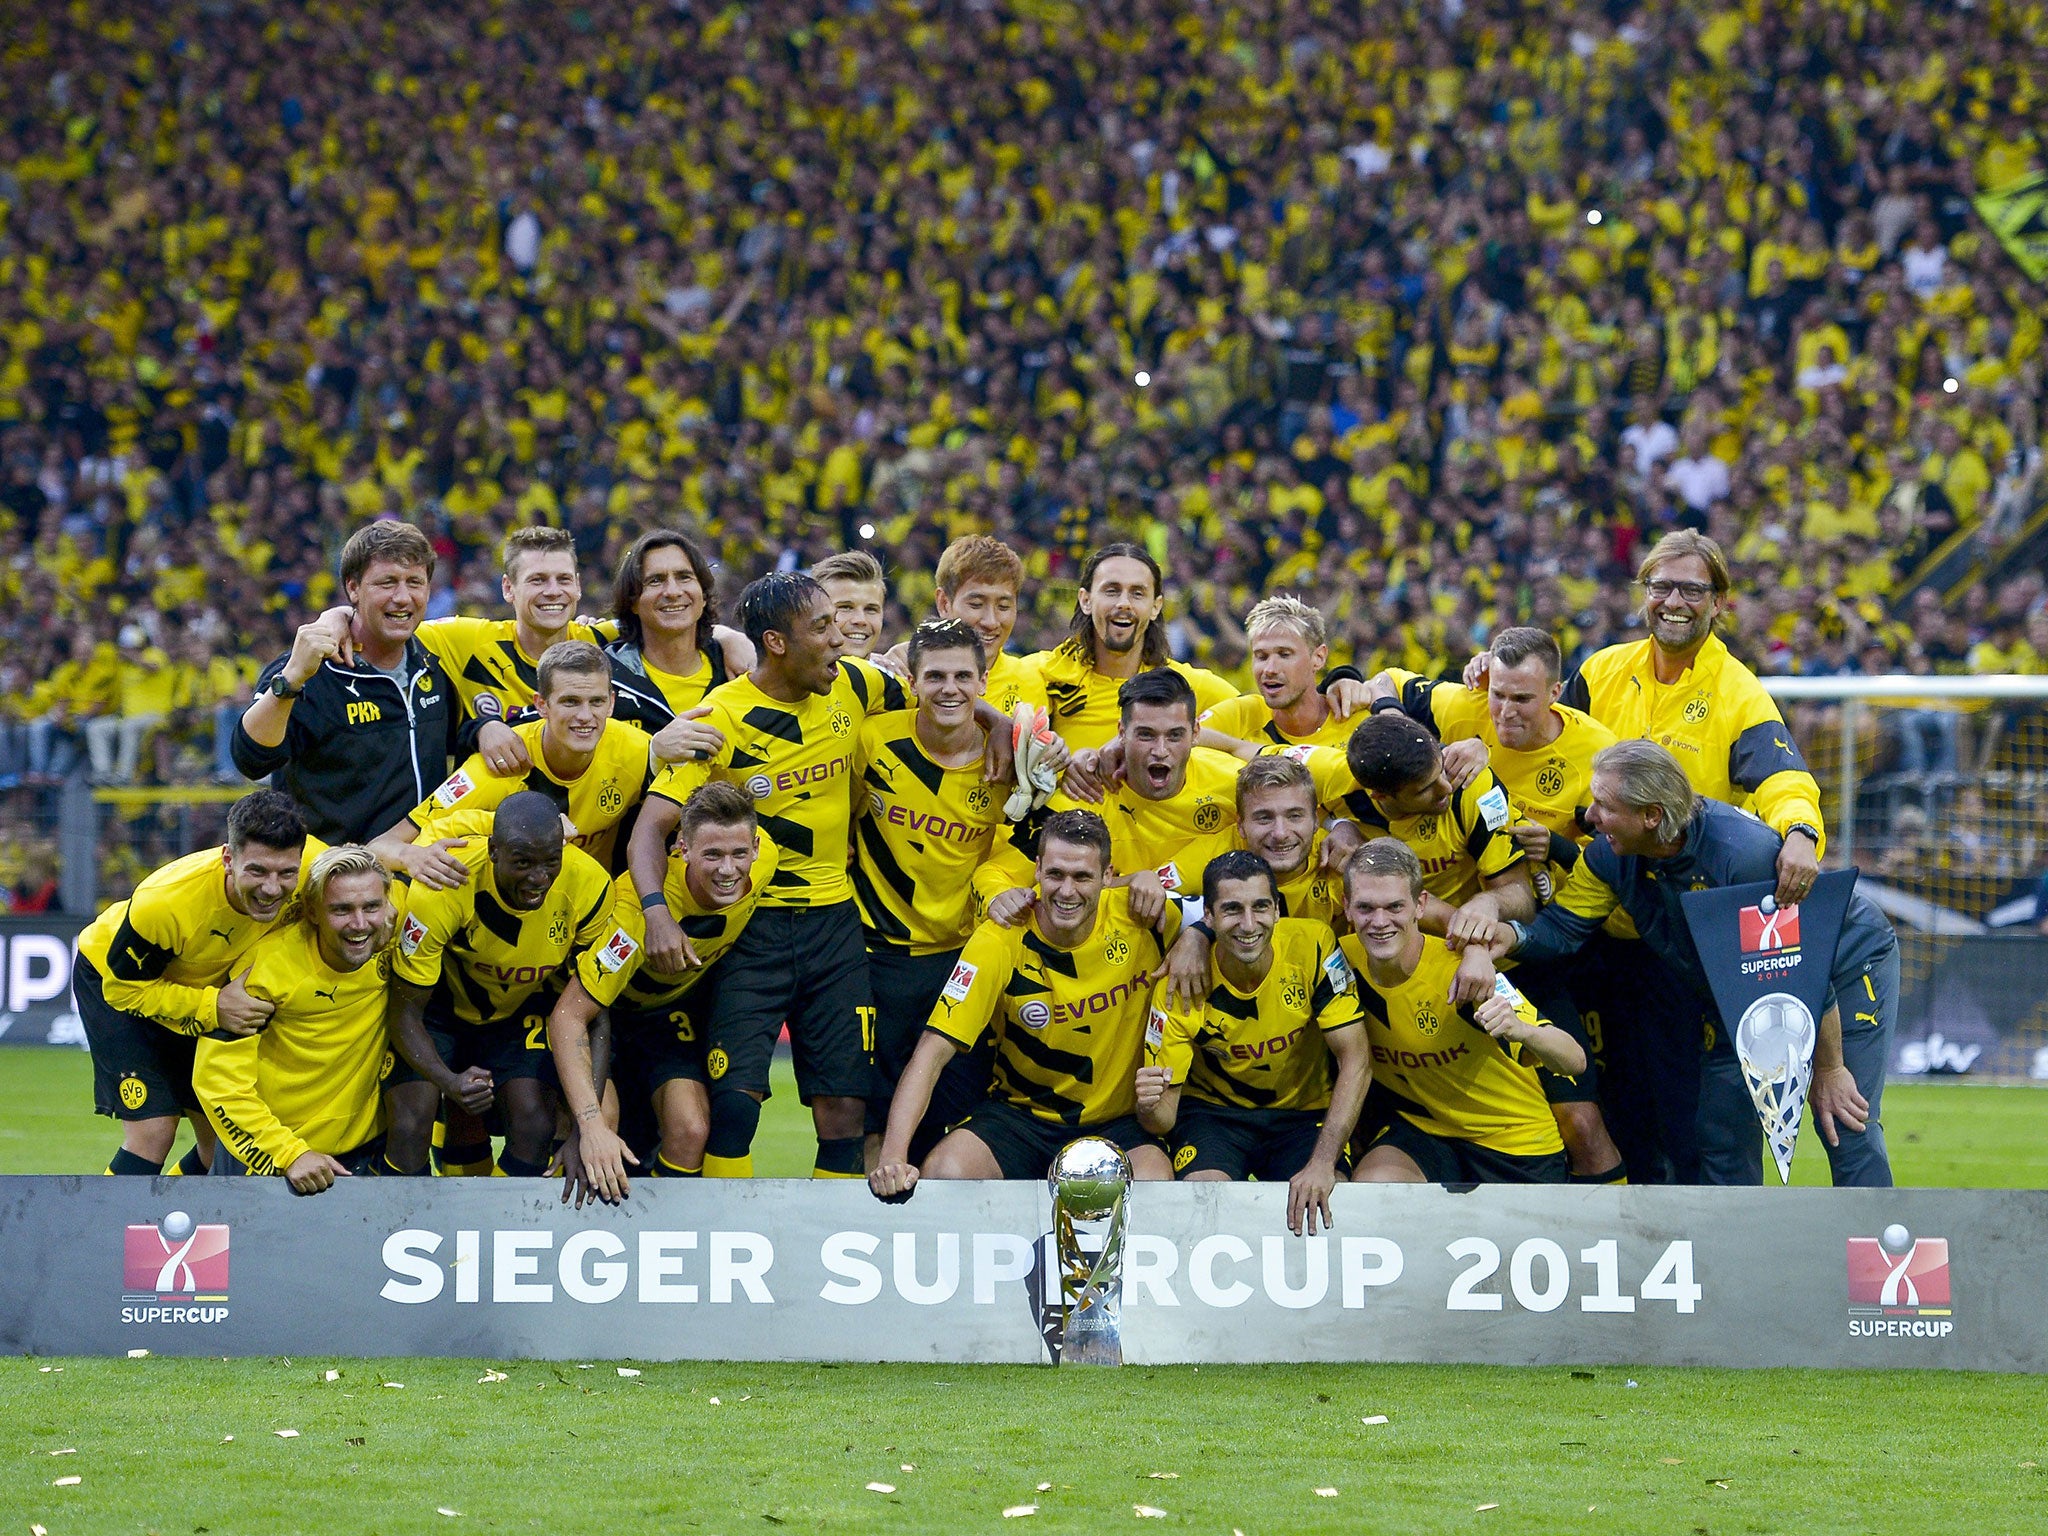 The Borussia Dortmund players celebrate victory over Bayern Munich in the German Super
Cup on Wednesday